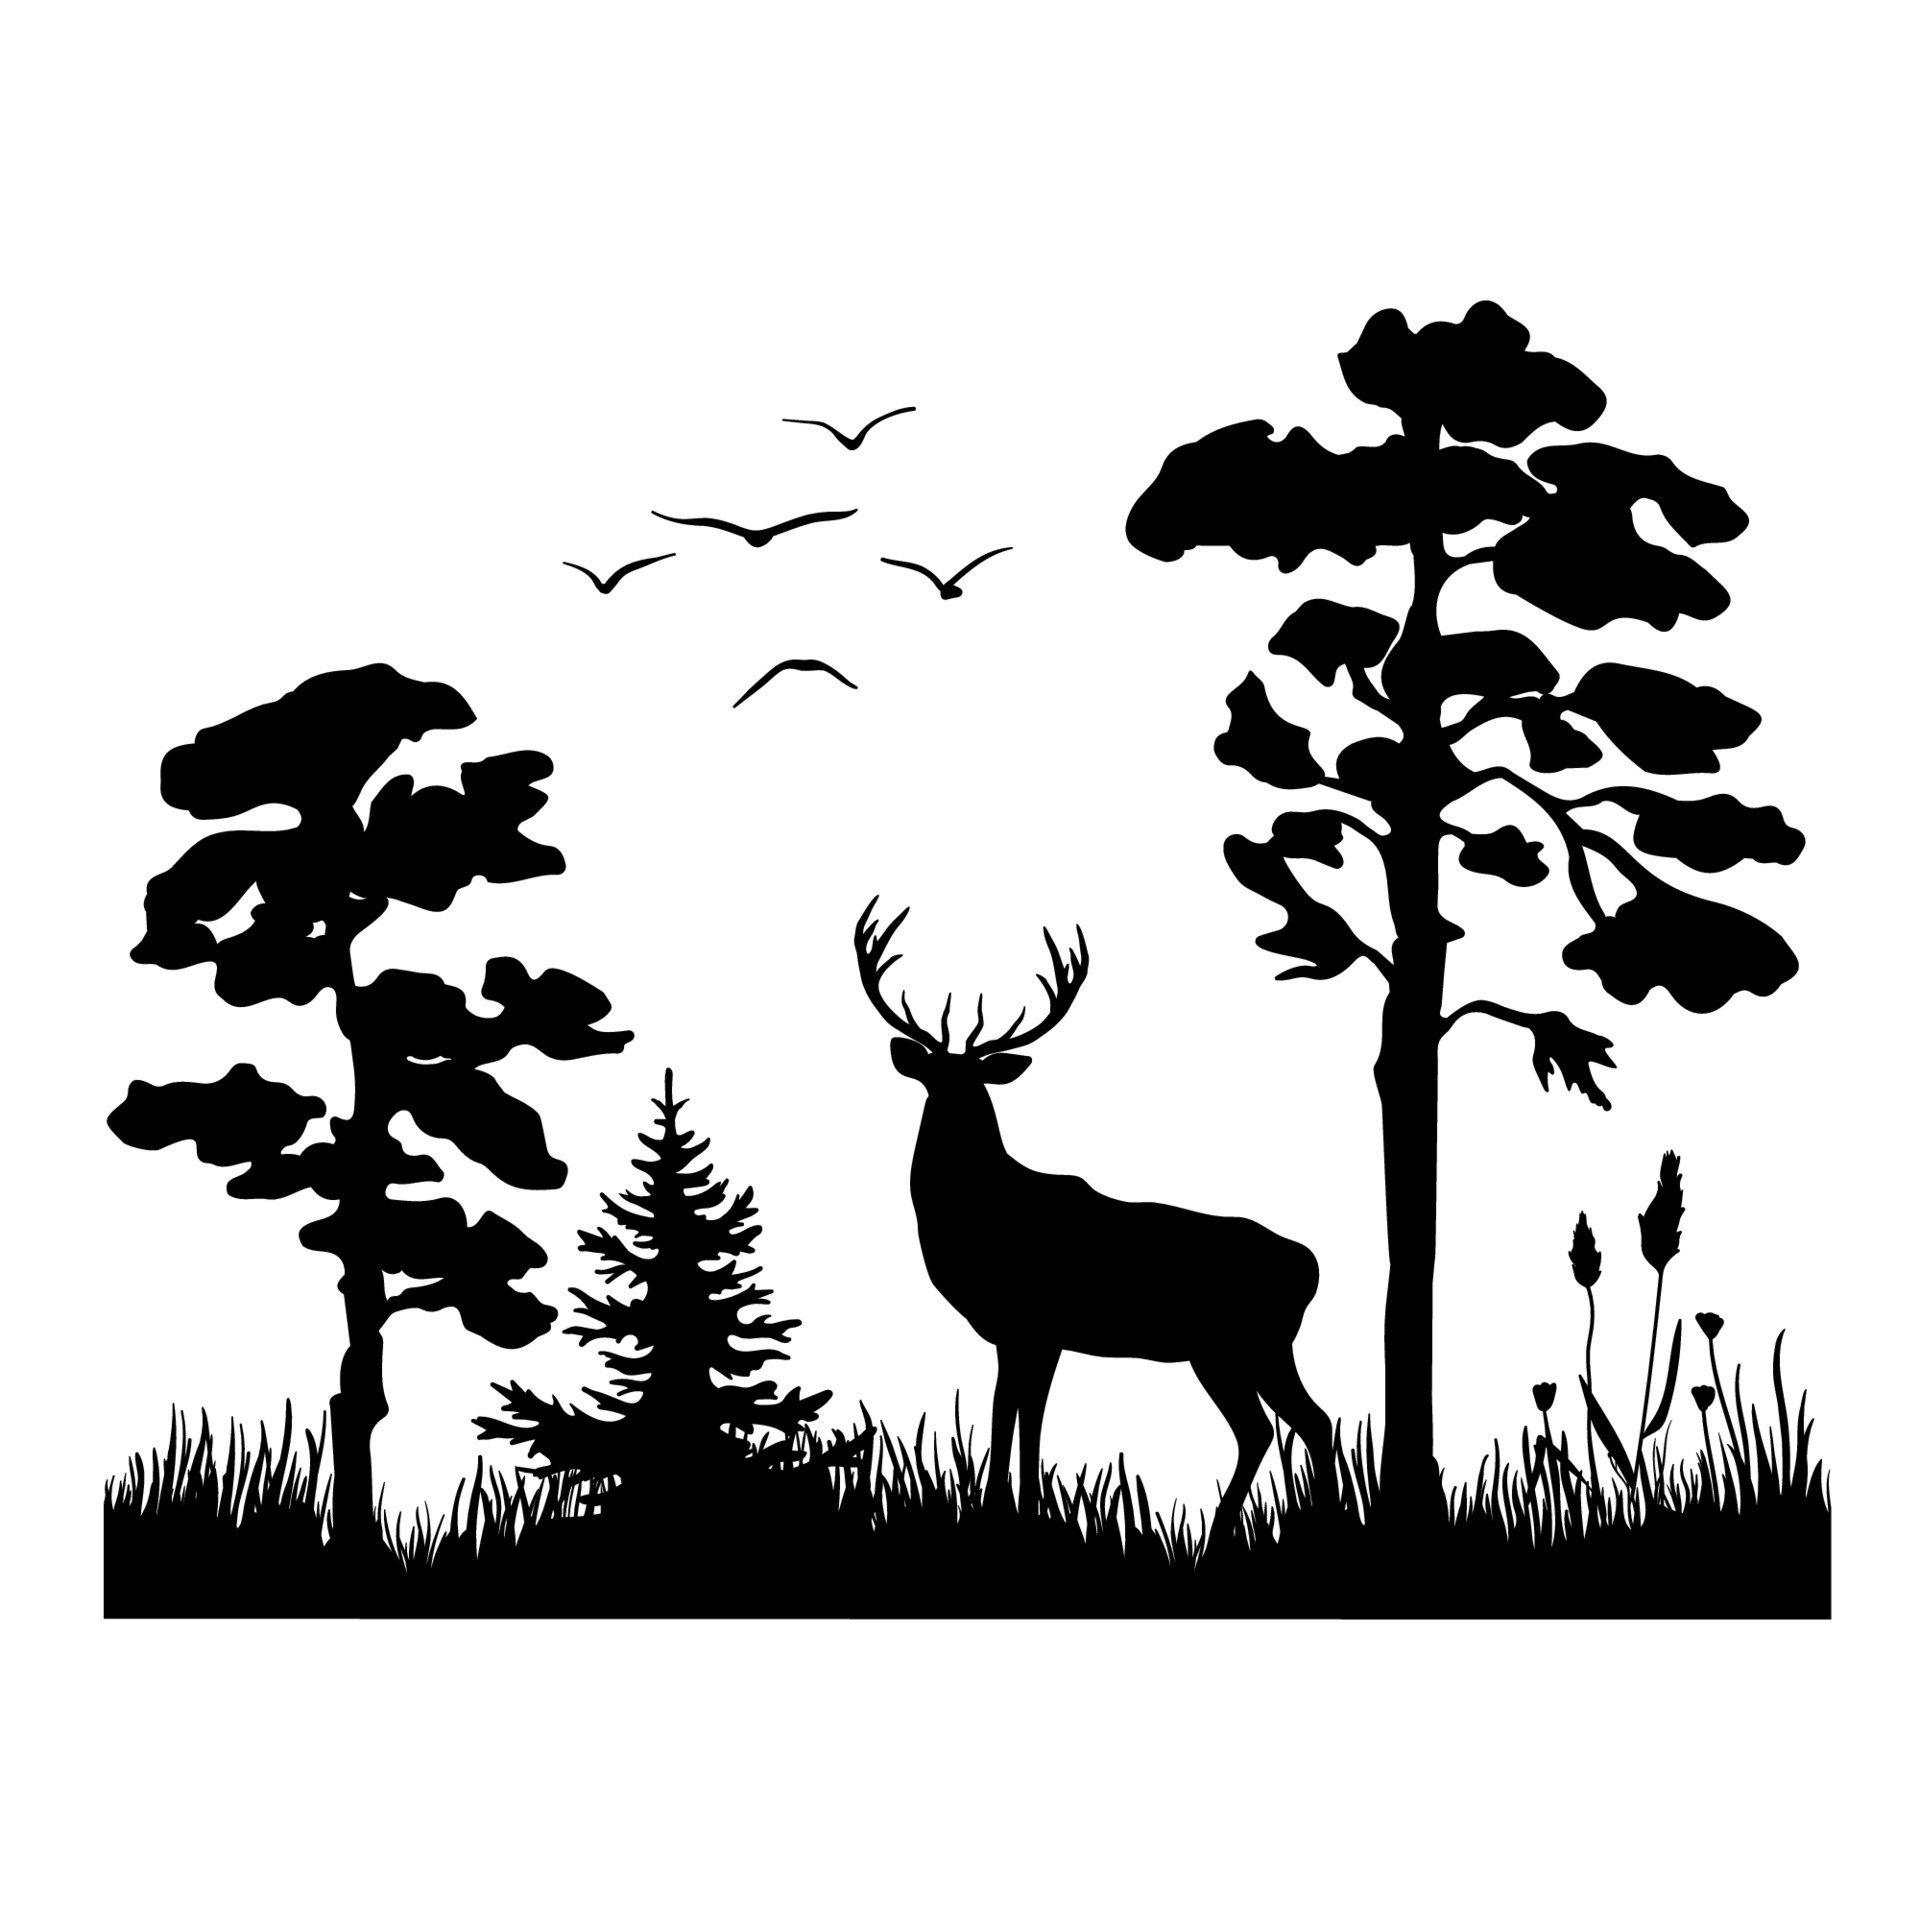 A black silhouette of a deer standing among the trees on the grass ...